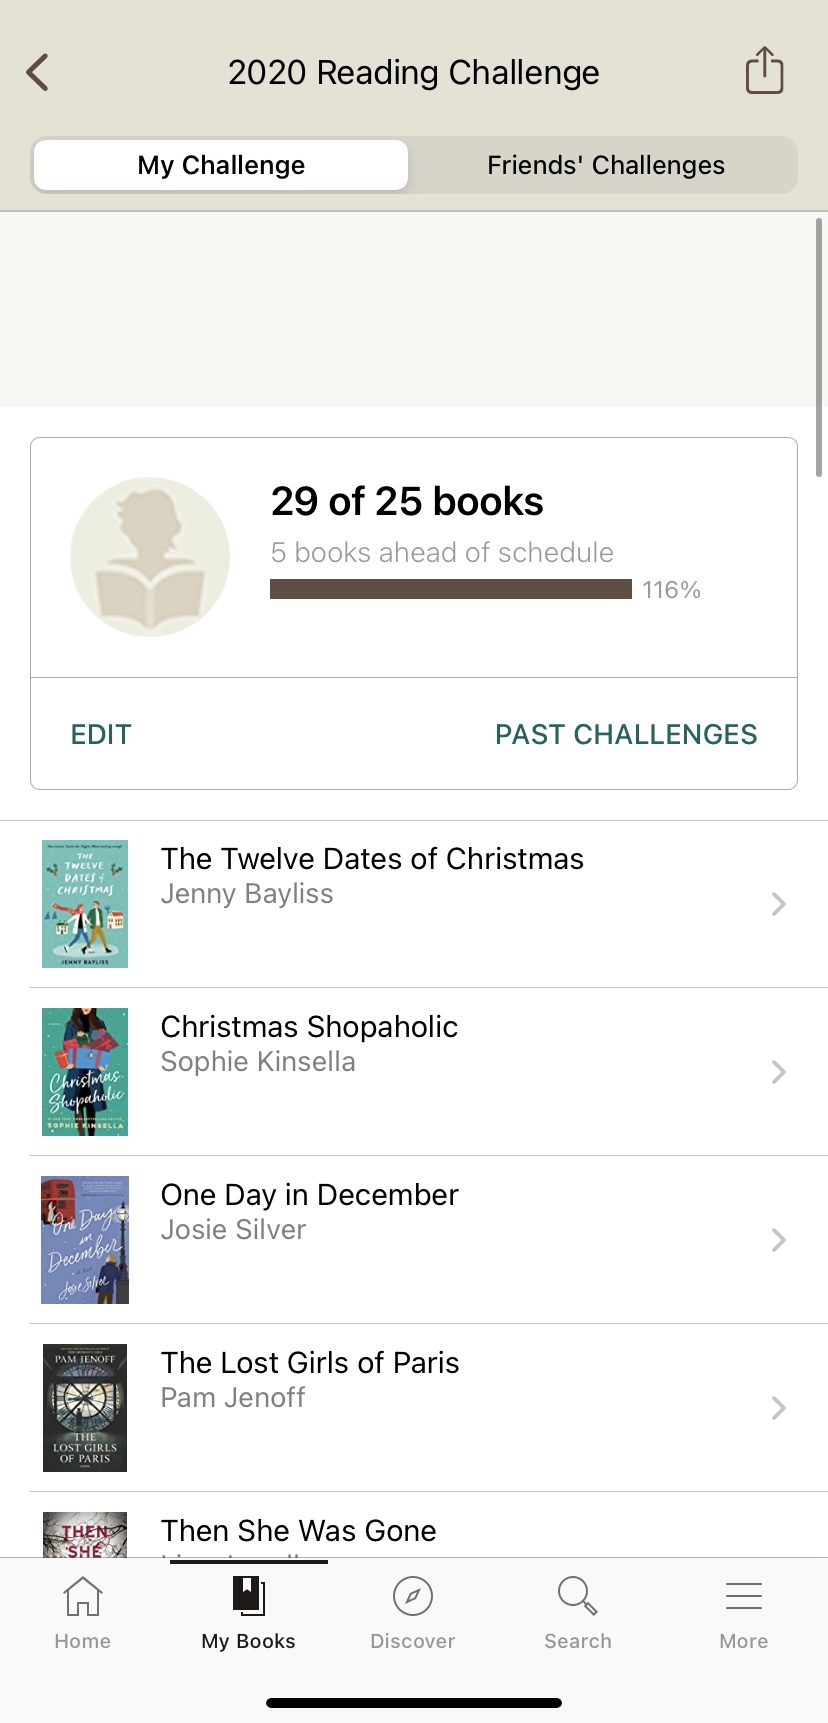 Goodreads Application reading challenge
Book-AMonth Reading challenge